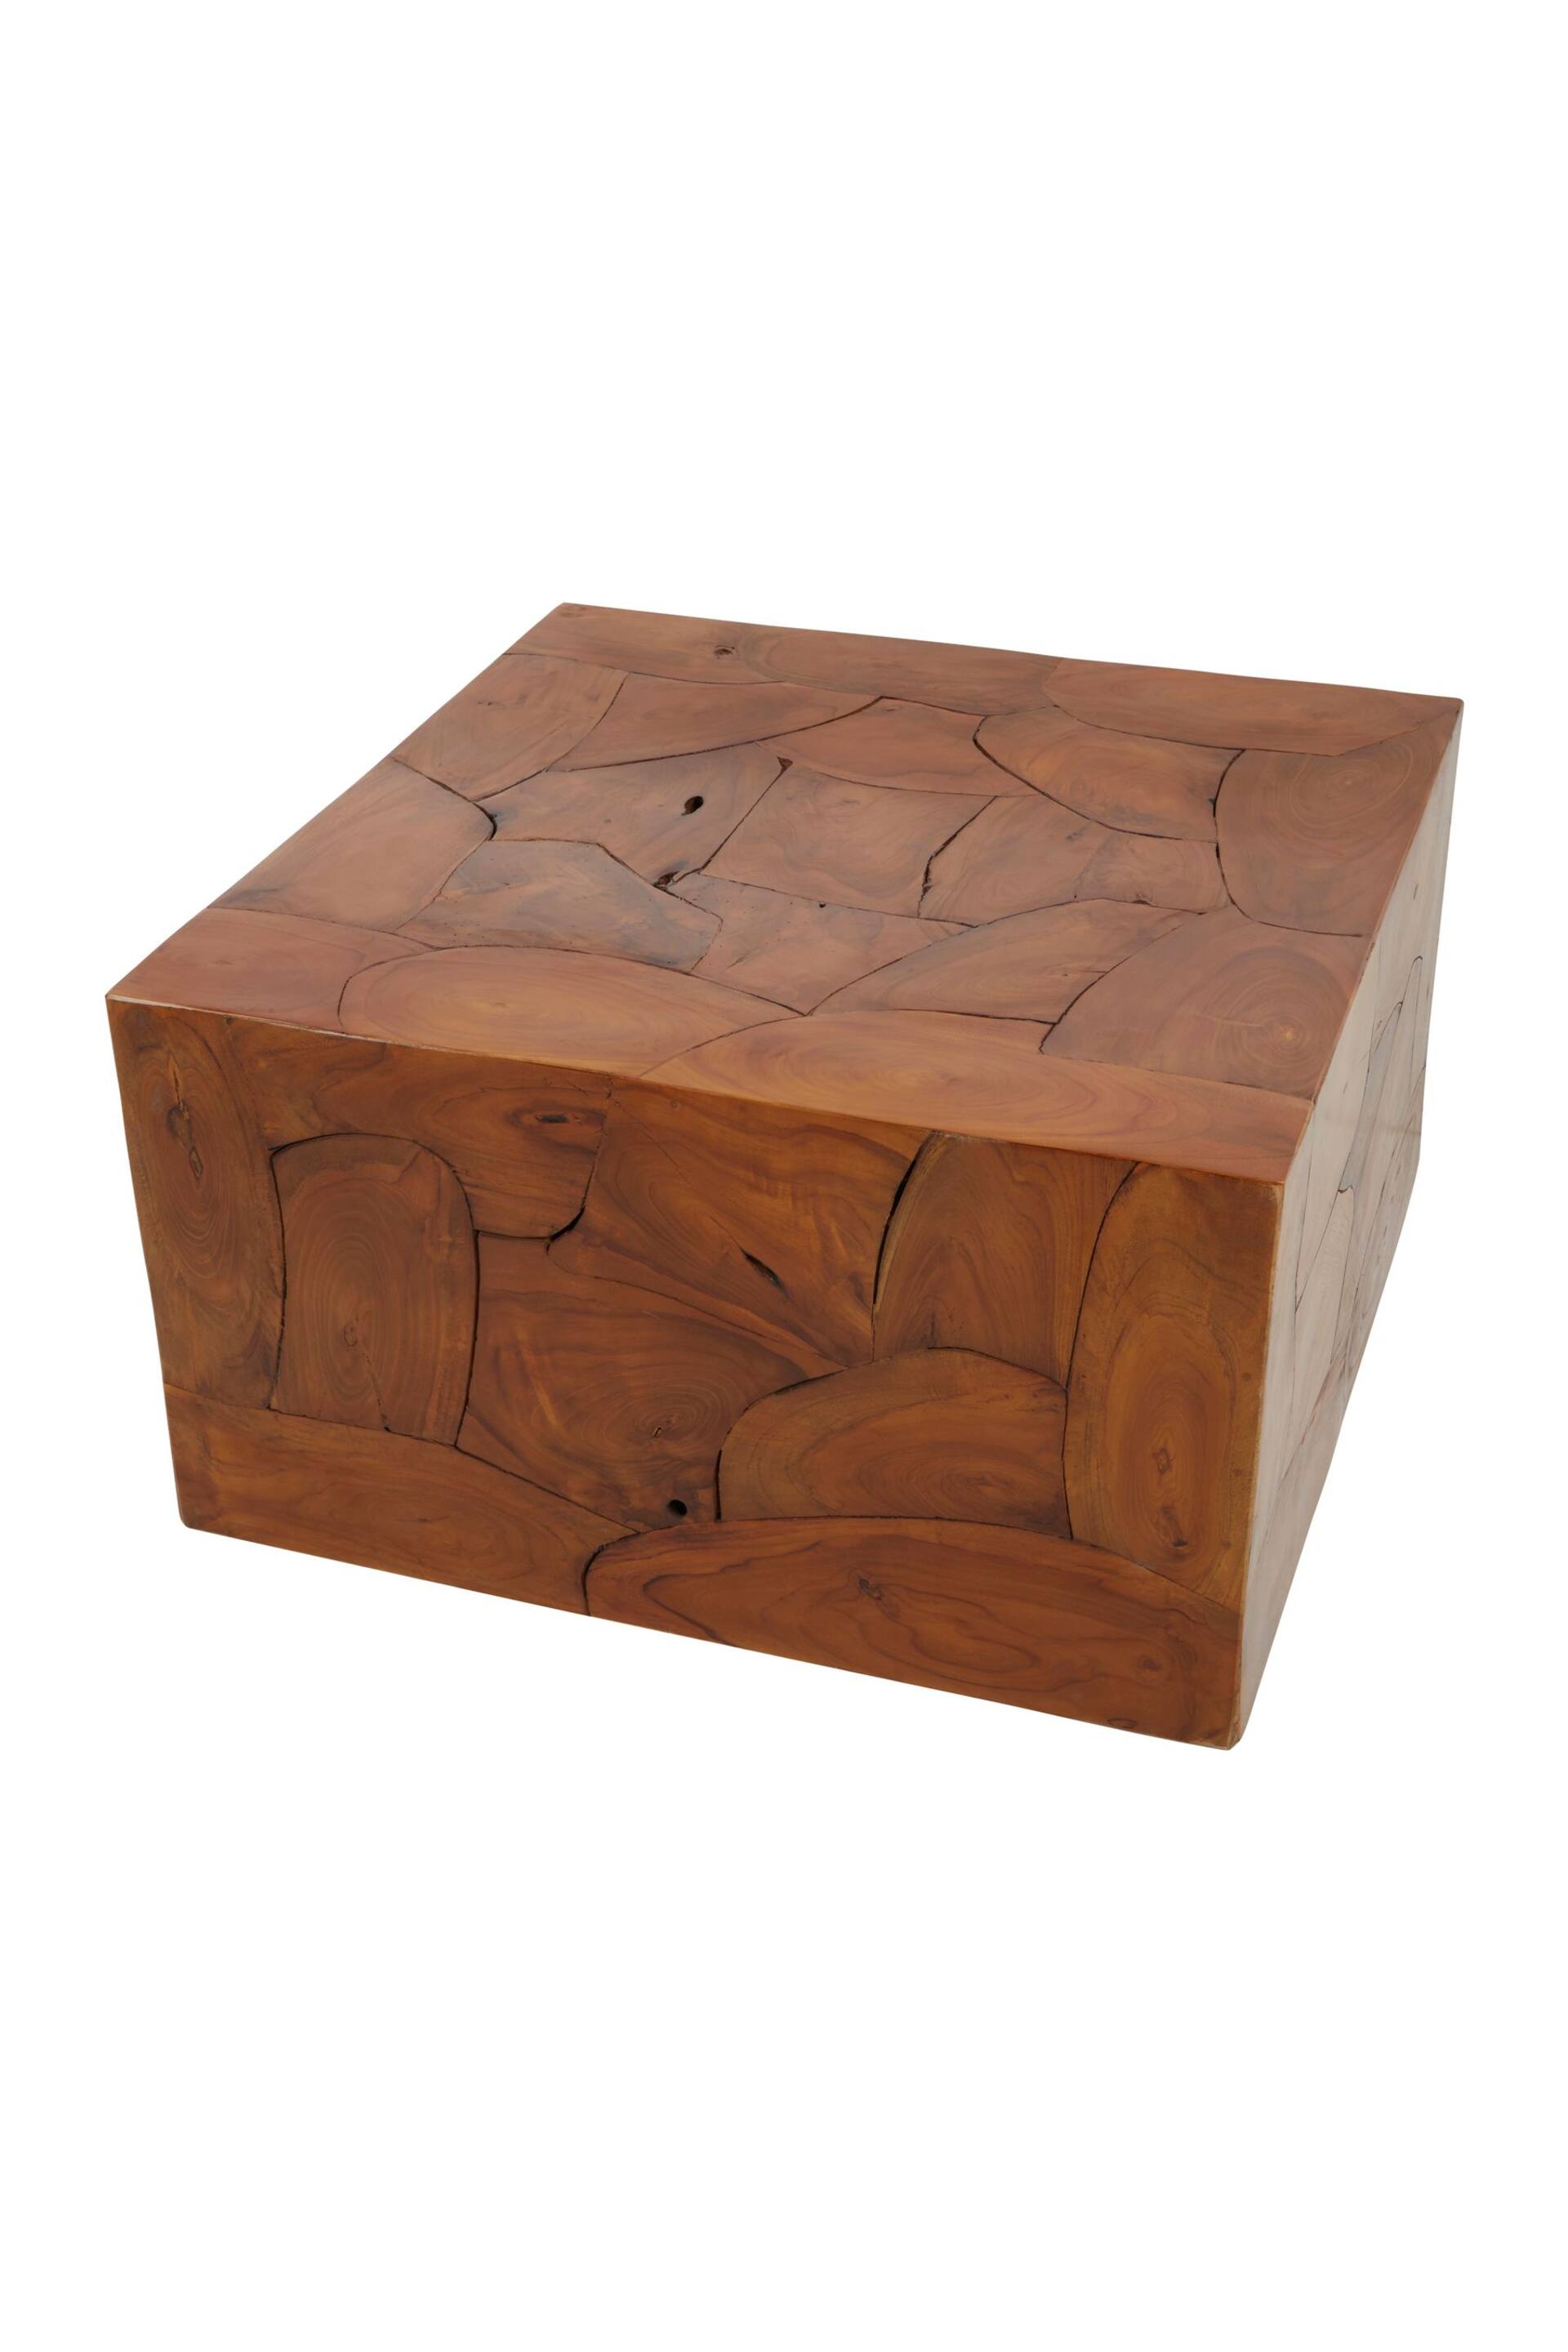 Fifty Five South Brown Surak Teak Wood Coffee Table - Image 4 of 6